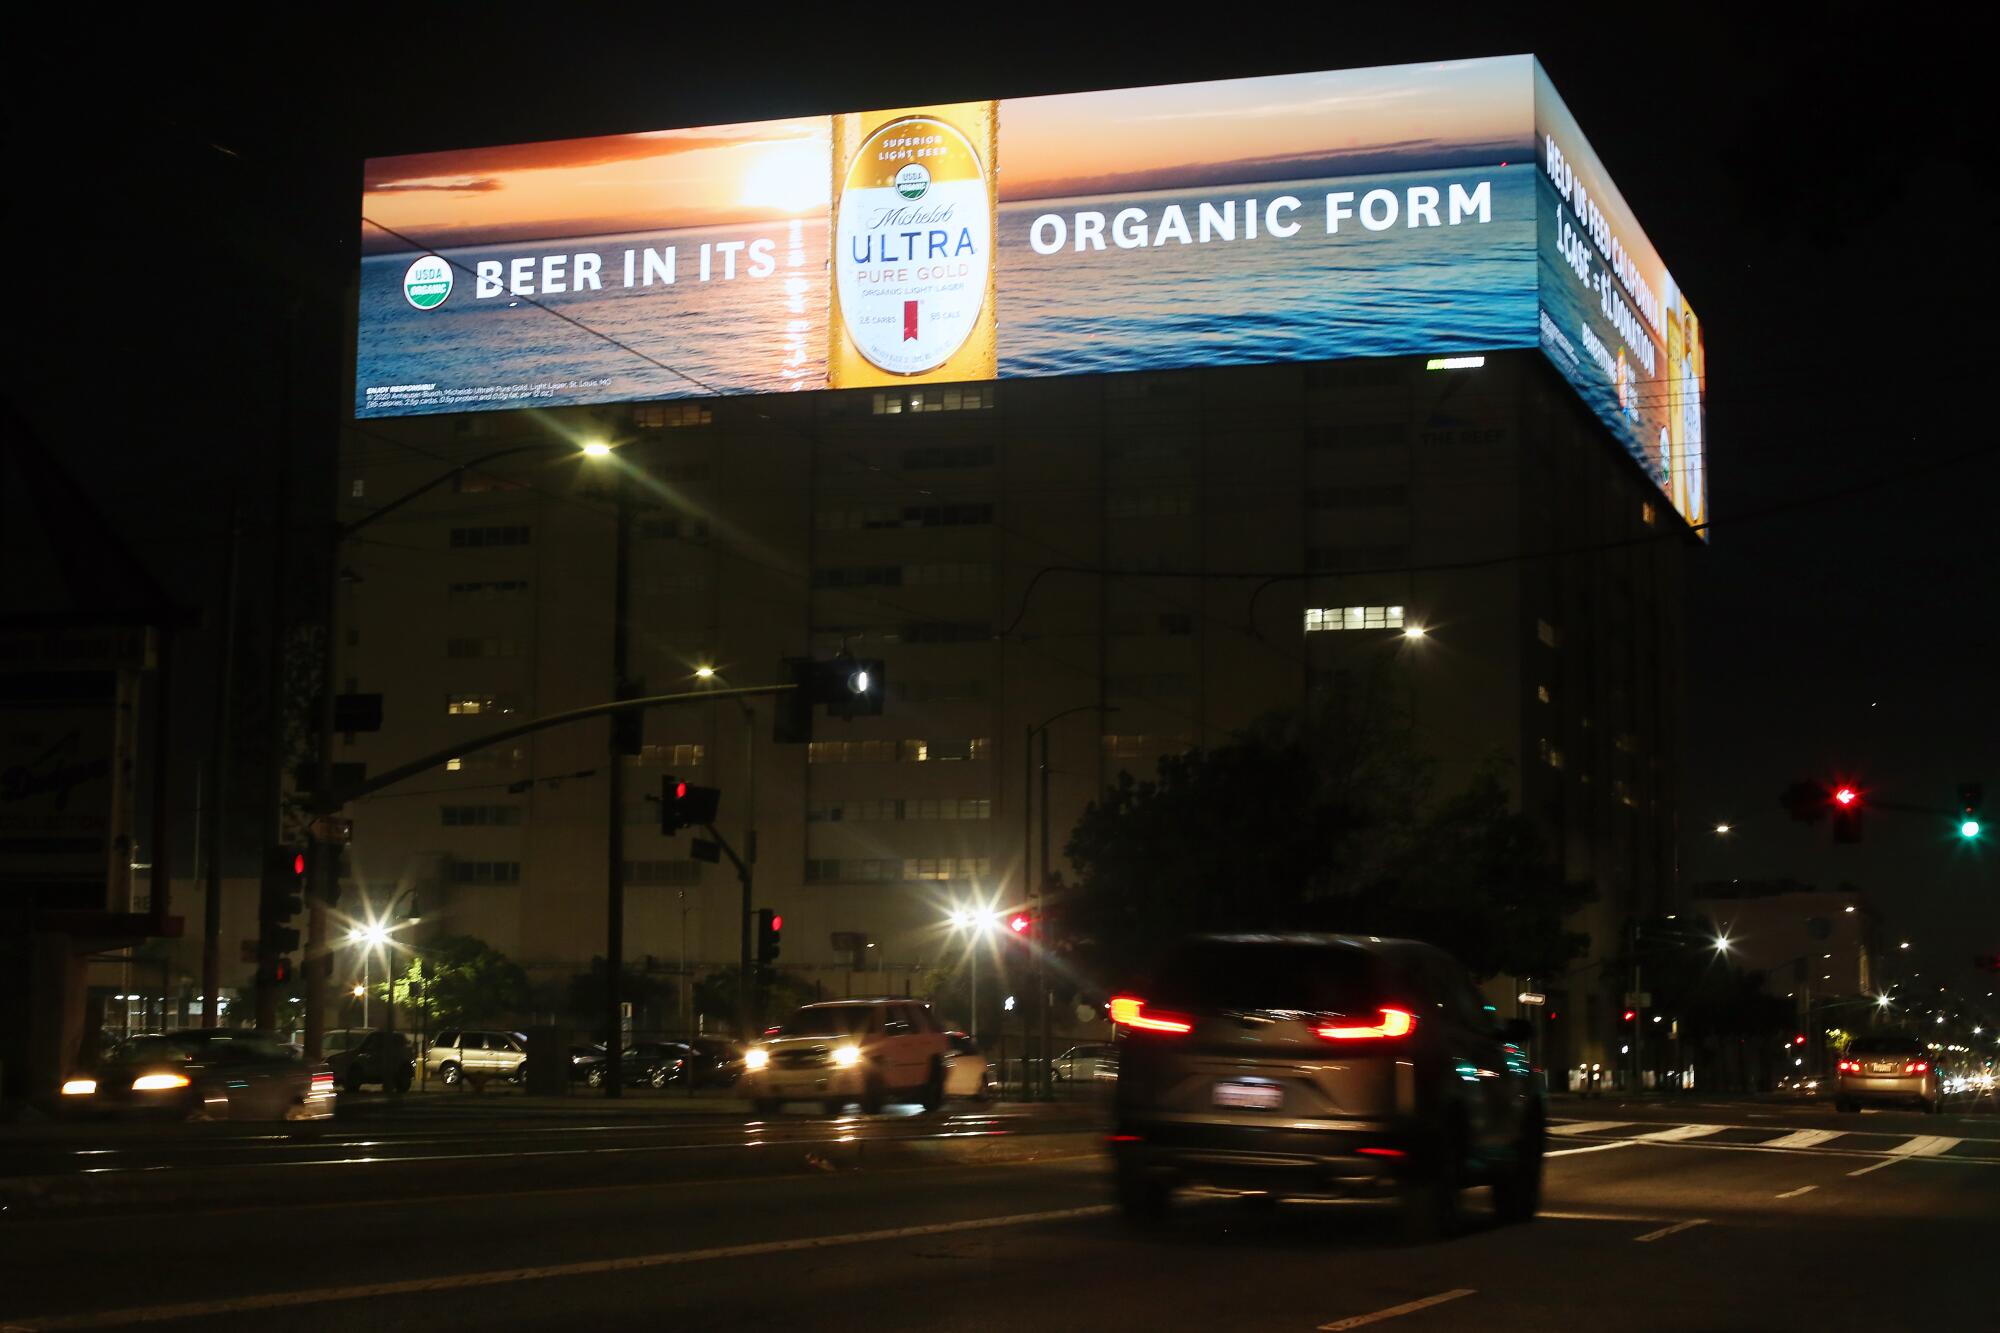 Cars on a nighttime city street pass below brightly lighted electronic billboards advertising beer